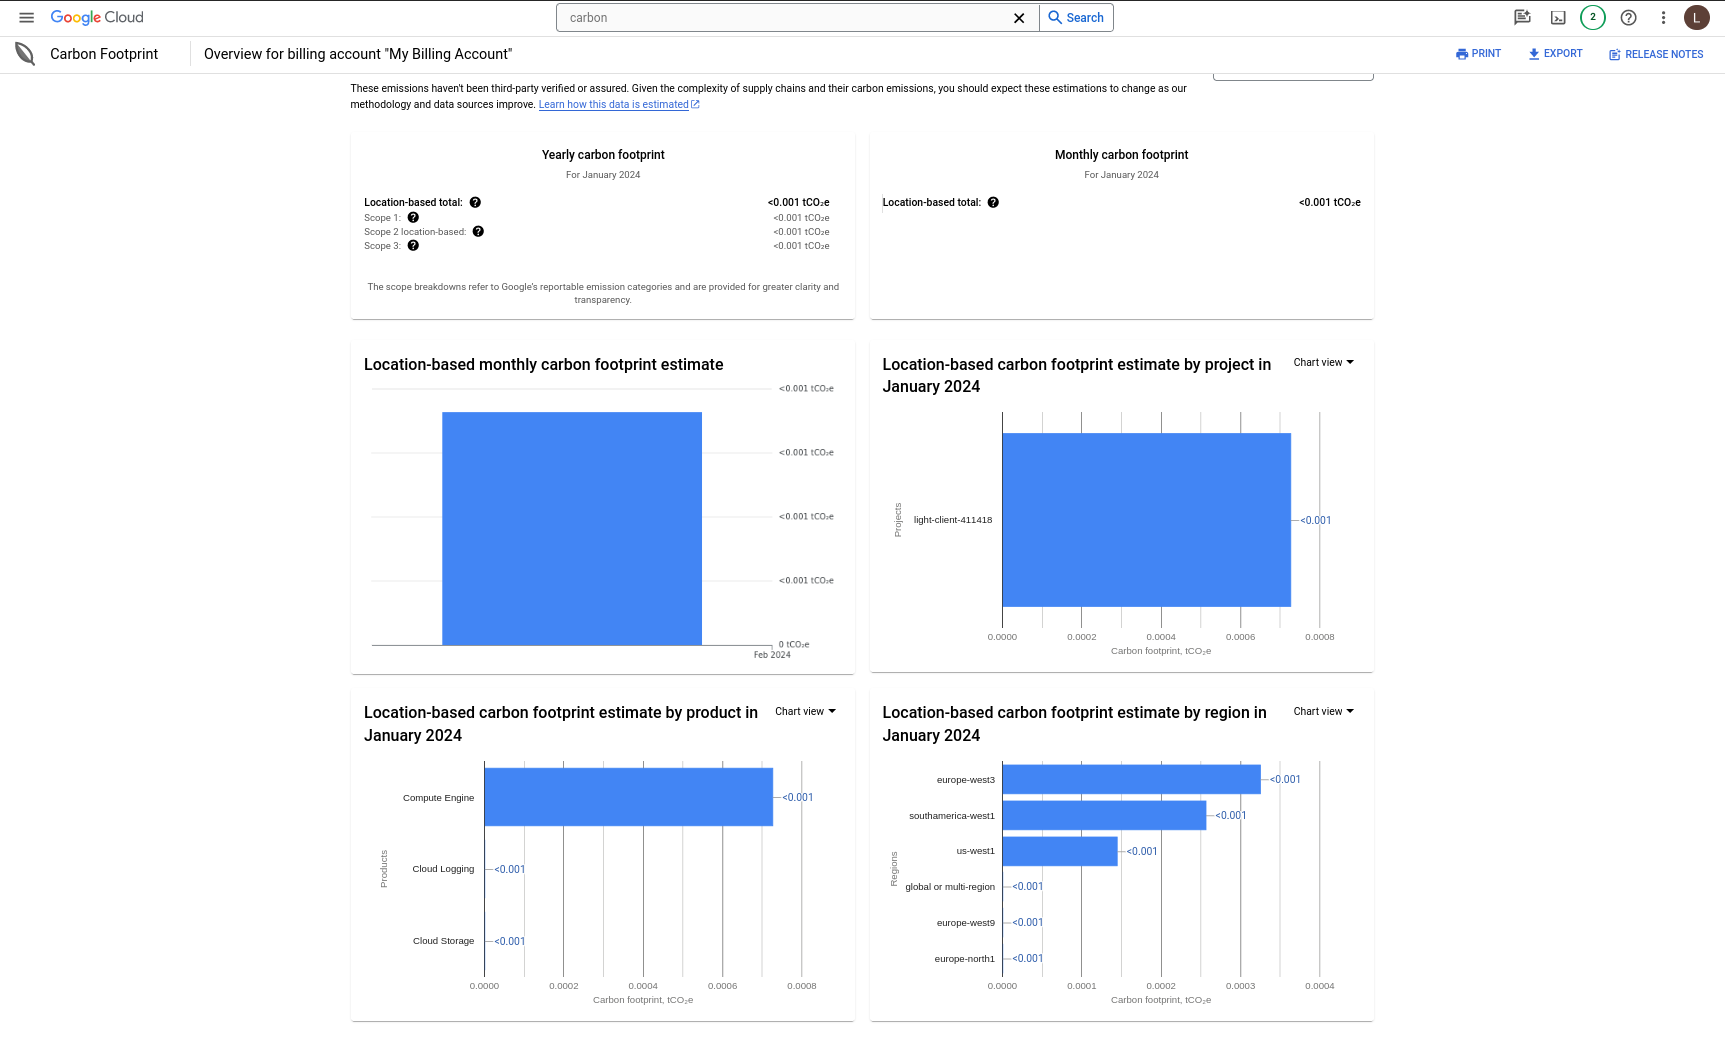 The image is a screenshot of the Google Cloud interface, specifically the “Overview for billing account ‘My Billing Account’” page under the “Carbon Footprint” tab. It displays various graphs and data visualizations representing location-based monthly carbon footprint estimates. The interface includes a yearly carbon footprint section, a bar graph displaying monthly carbon footprint in kgCO2e units, and three separate bar graphs showing location-based monthly carbon footprint estimates by project, by product, and by region for January 2024. The interface also contains various tabs for user interaction.